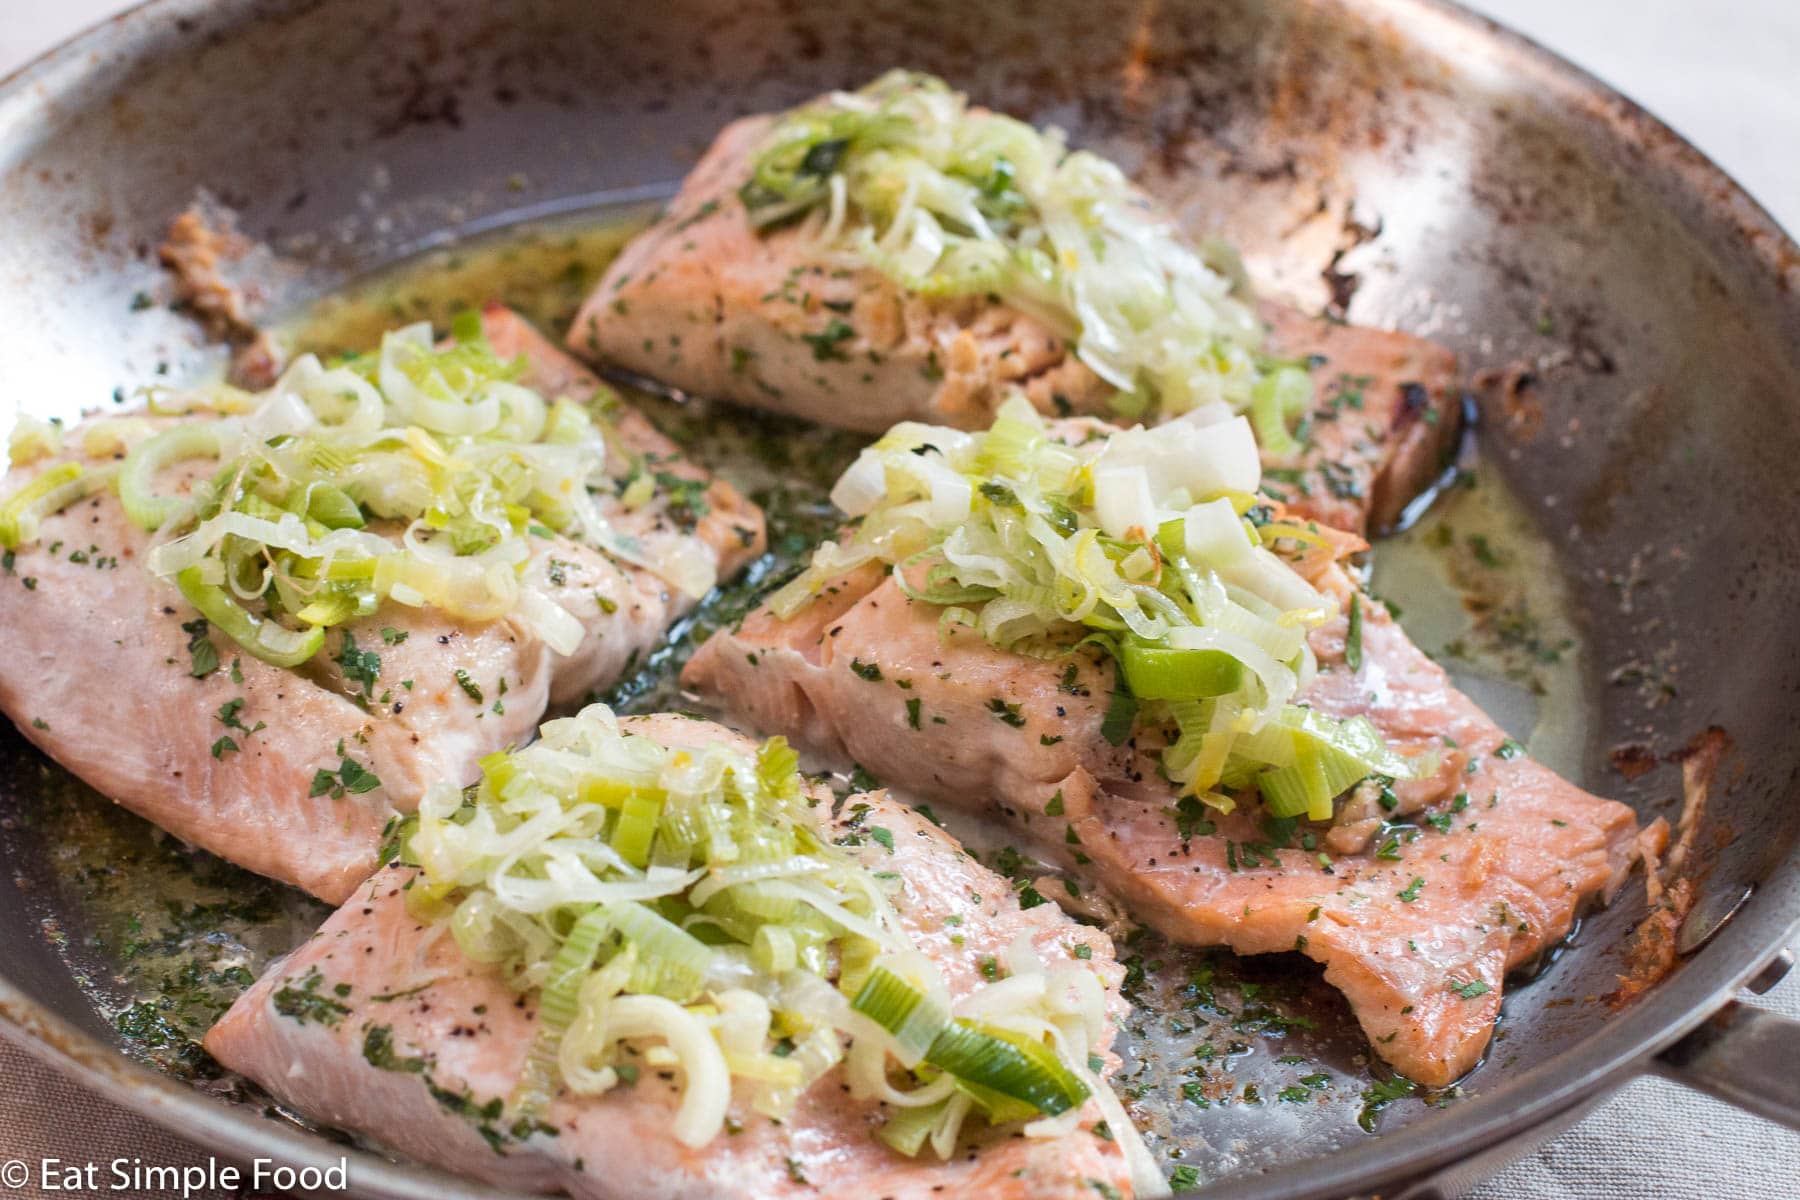 4 Roast Salmon pieces with Buttery Leeks On Top In a Stainless Steel Pan